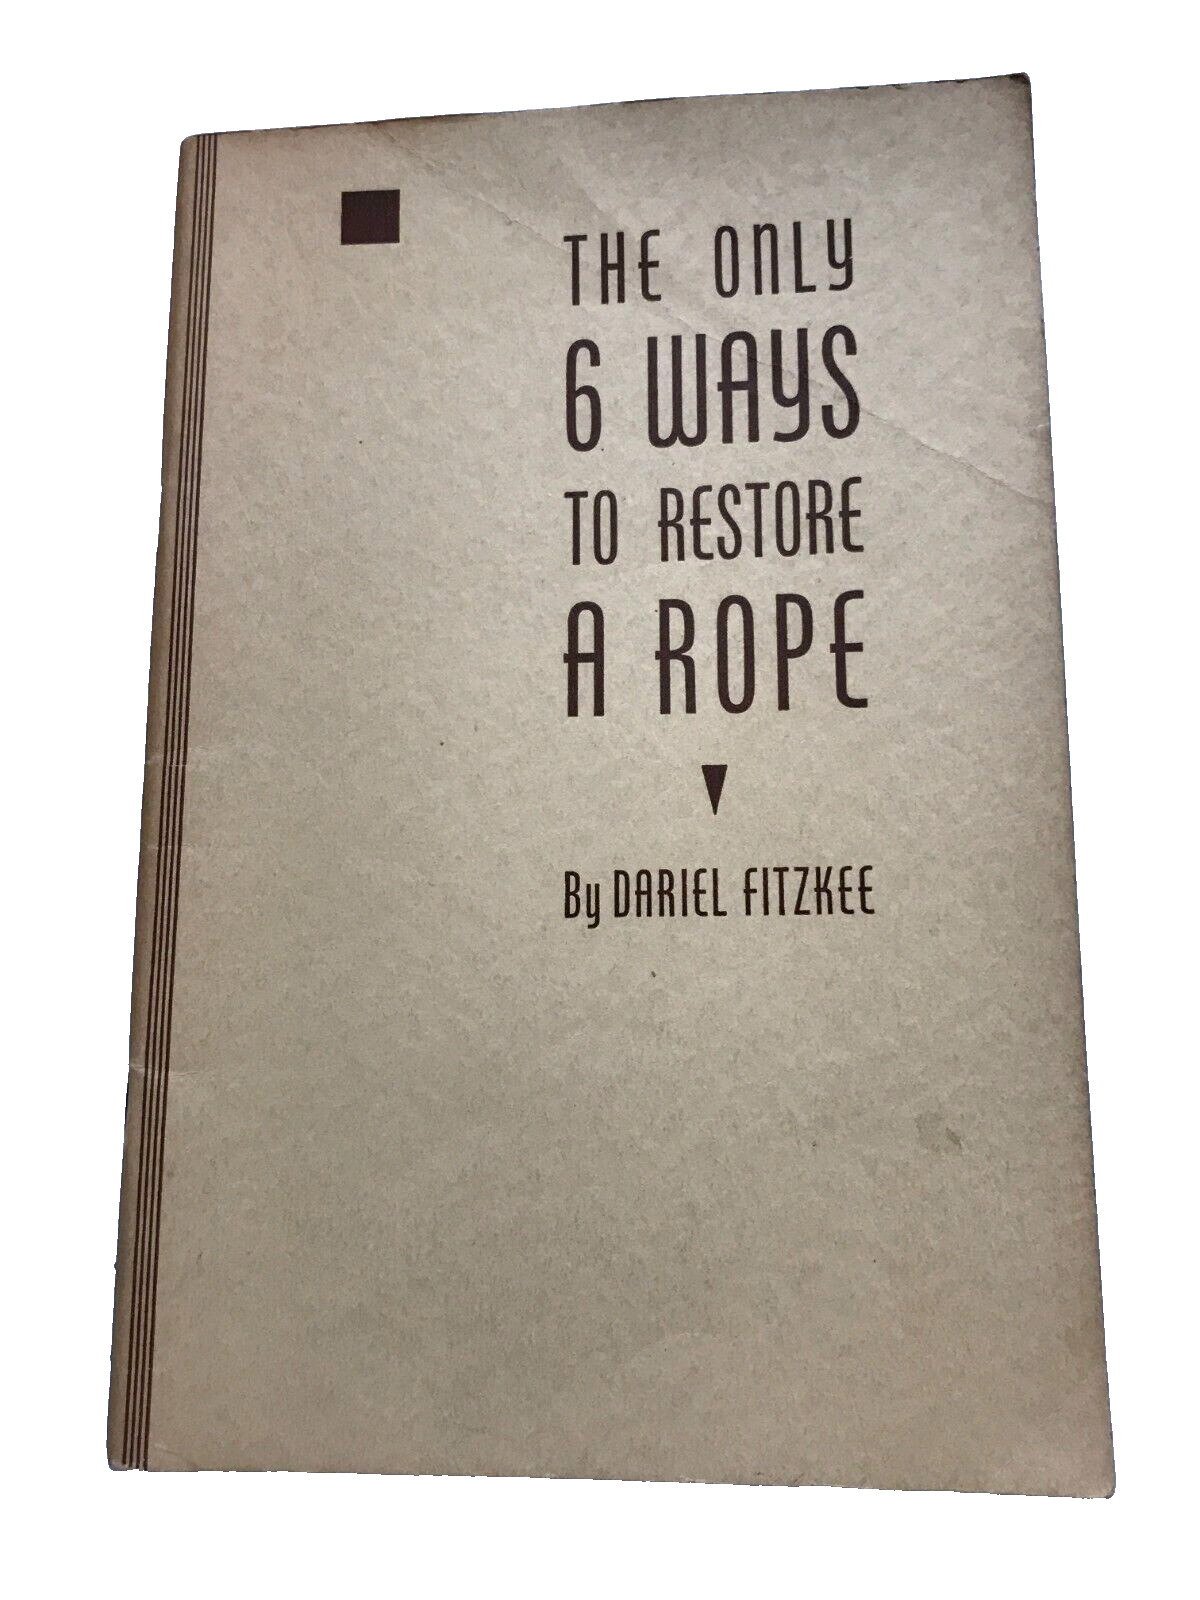 1944 ANTIQUE ONLY 6 WAYS TO RESTORE A ROPE MAGIC TRICKS BOOK